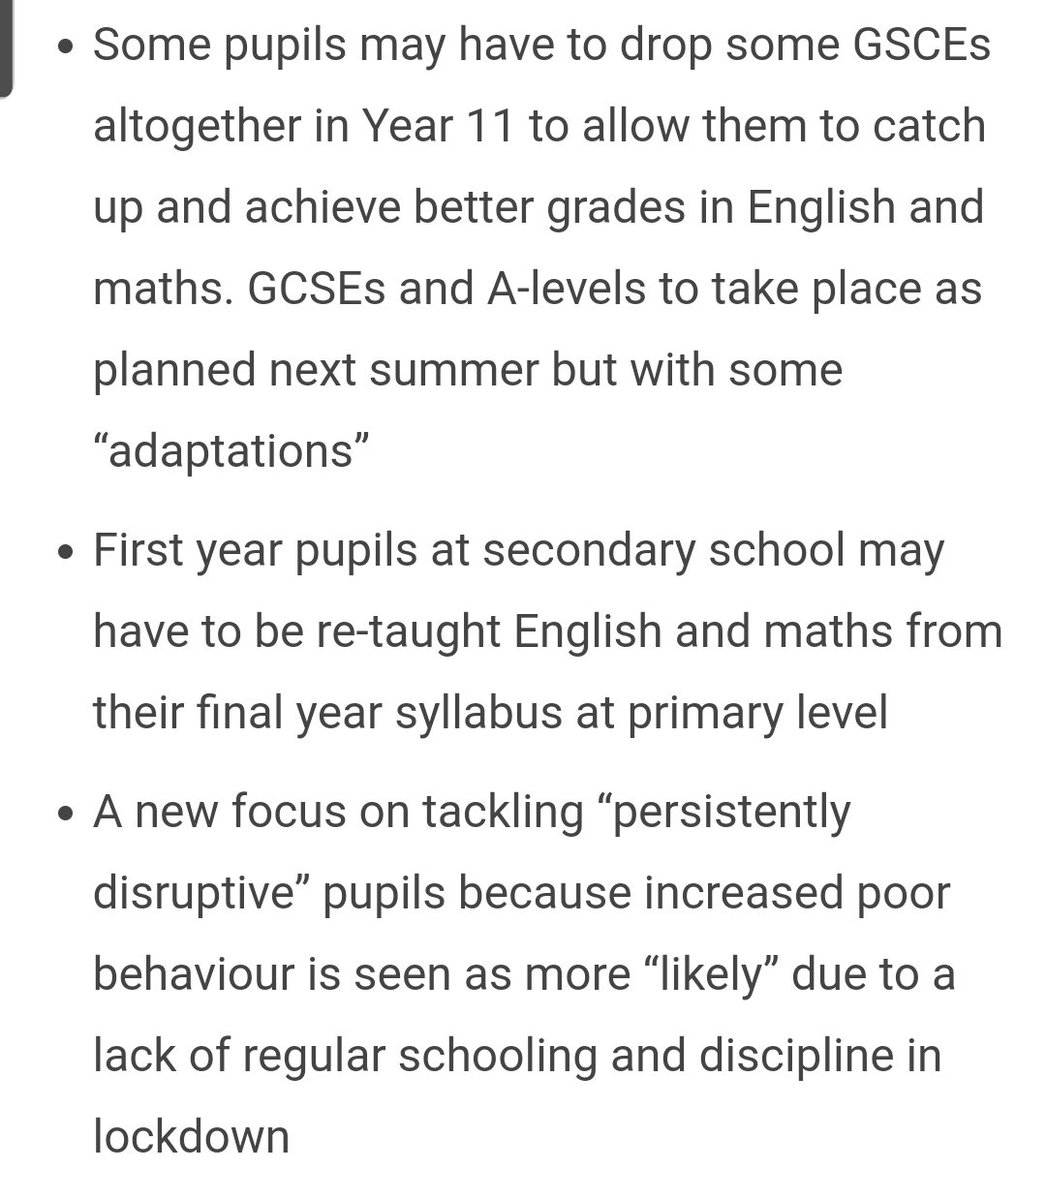 27/ Yep students missing out on non core GCSE, what if they wanted to learn these at A level? Are those opportunities now gone?Several non-core teachers have contacted me with concerns for their jobs, some schools were planning redundancies pre Covid,we now know who will get cut